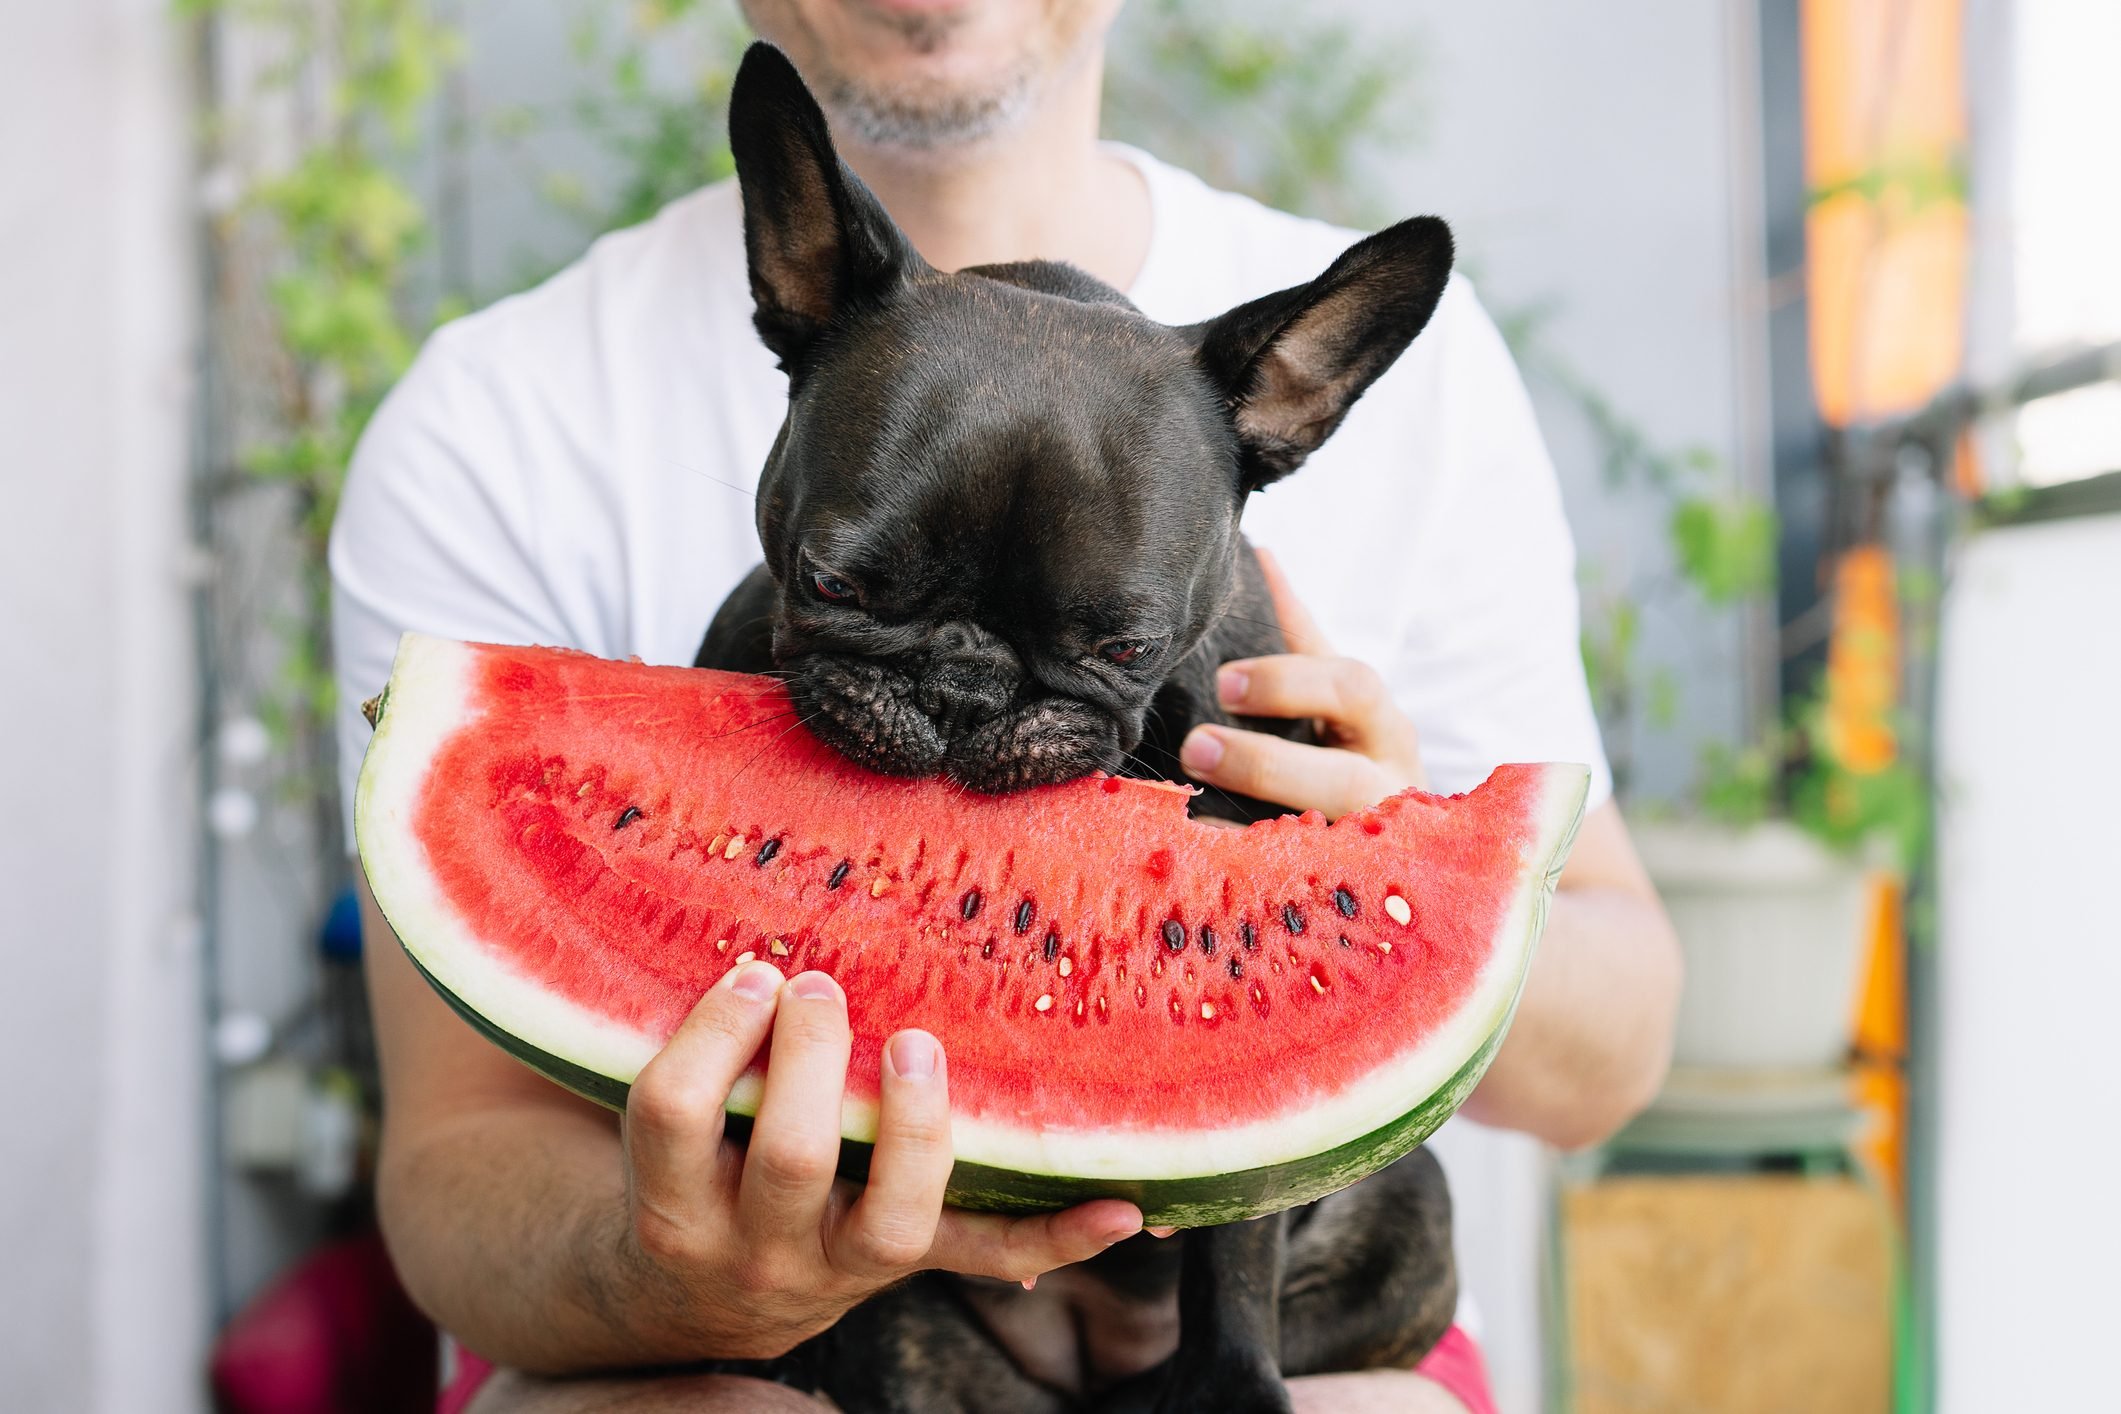 <p>It's no secret that dogs love food. They sometimes eat strange things (for instance, <a href="https://www.rd.com/article/why-do-dogs-eat-dirt/">why do dogs eat dirt?</a>), and they will happily scarf down human food. But most dog owners know that there are plenty of human <a href="https://www.rd.com/list/foods-dogs-cant-eat/">foods dogs can't eat</a>—not just because they can be unhealthy but because they can be toxic. And beyond that, dogs can have adverse reactions to certain foods, even if they are supposedly good for them. "It's important to know that dogs can have food intolerances just like people, causing gastrointestinal upset or even an allergic reaction," says Kelly Ryan, DVM, Director of Veterinary Services for the Animal Medical Center of Mid-America. Be sure to monitor your dog and check with your vet if you're questioning whether to introduce a new food. Dr. Ryan also notes that human food that is not a specific part of your dog's daily food regimen should not take up more than 10 percent of his caloric intake; that's an important guideline when devising the very <a href="https://www.rd.com/list/best-diet-for-dogs-according-to-vets/">best diet for your dog</a>. But if you want to feed your pup human food in a responsible way, you're probably wondering what human foods your dog can eat. Here are the best options.</p>